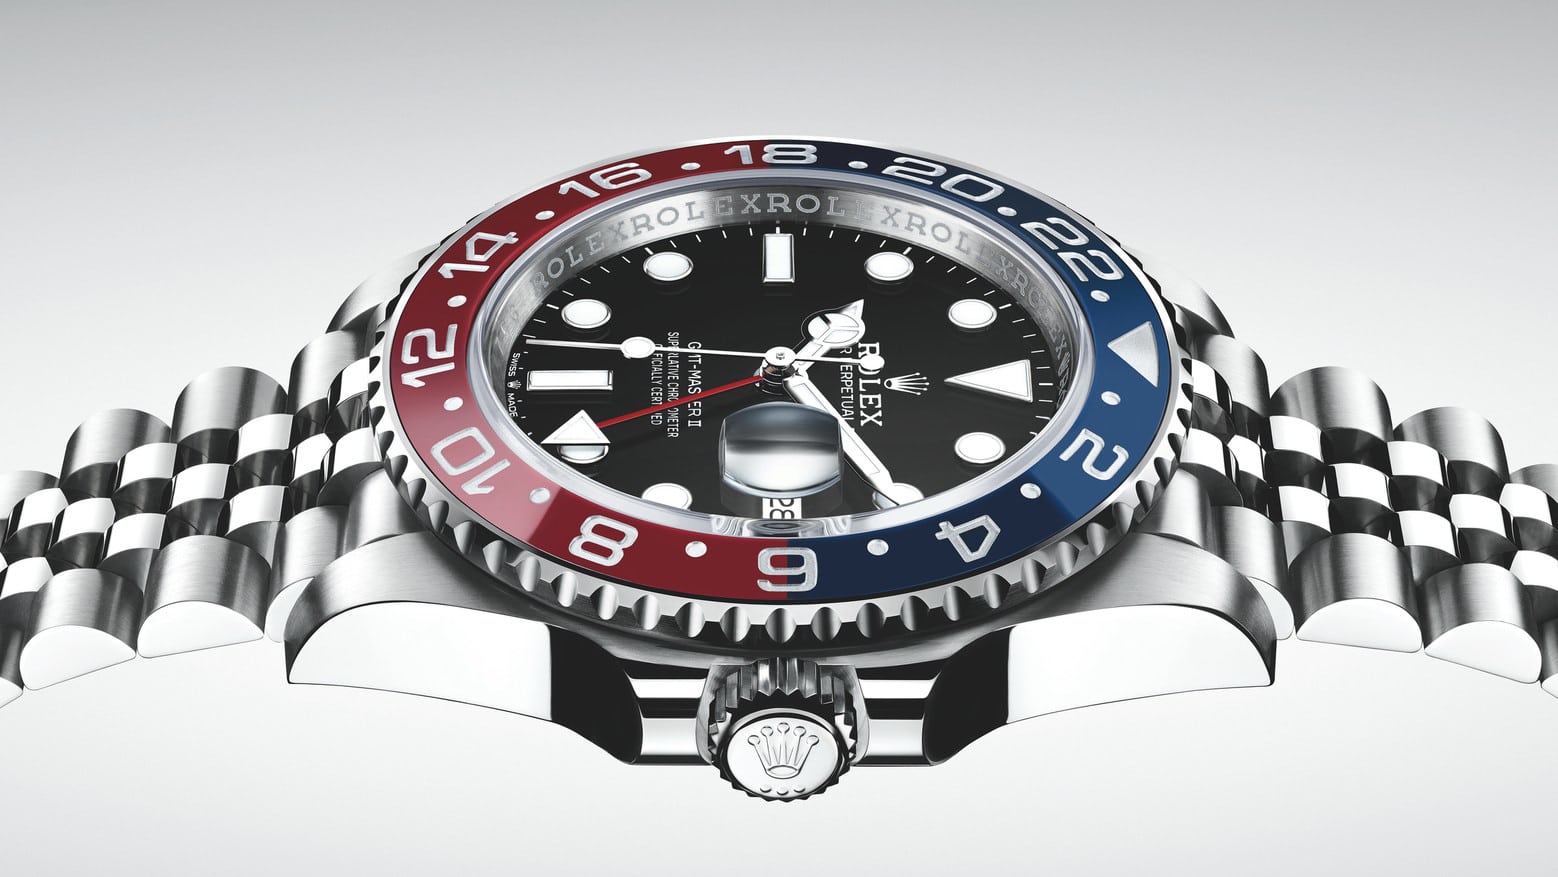 Introducing: The Rolex GMT-Master II Pepsi In Stainless Steel Ref. 126710 BLRO Hodinkee